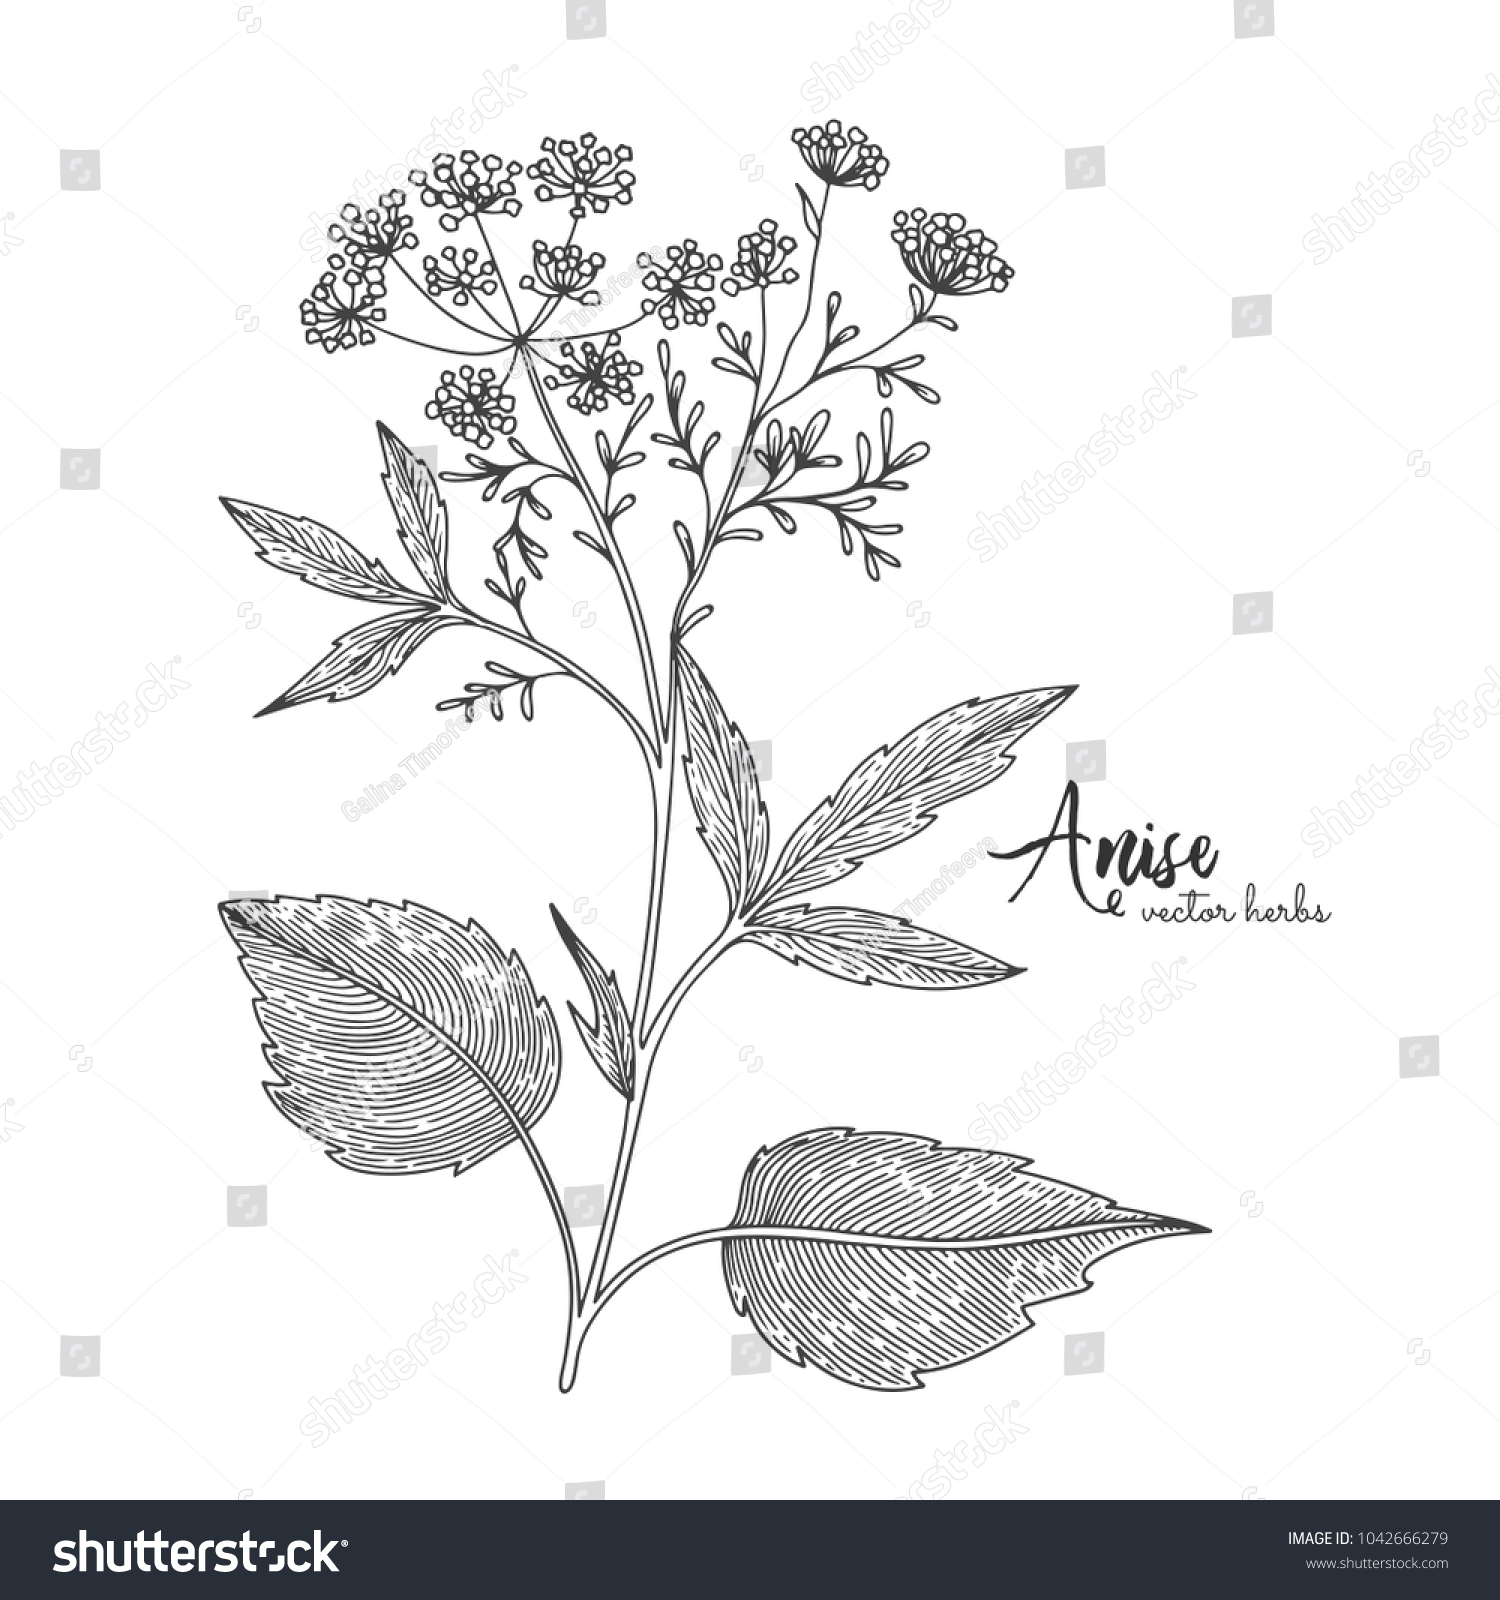 Anise Isolated On White Background Herbal Stock Vector 1042666279 ...